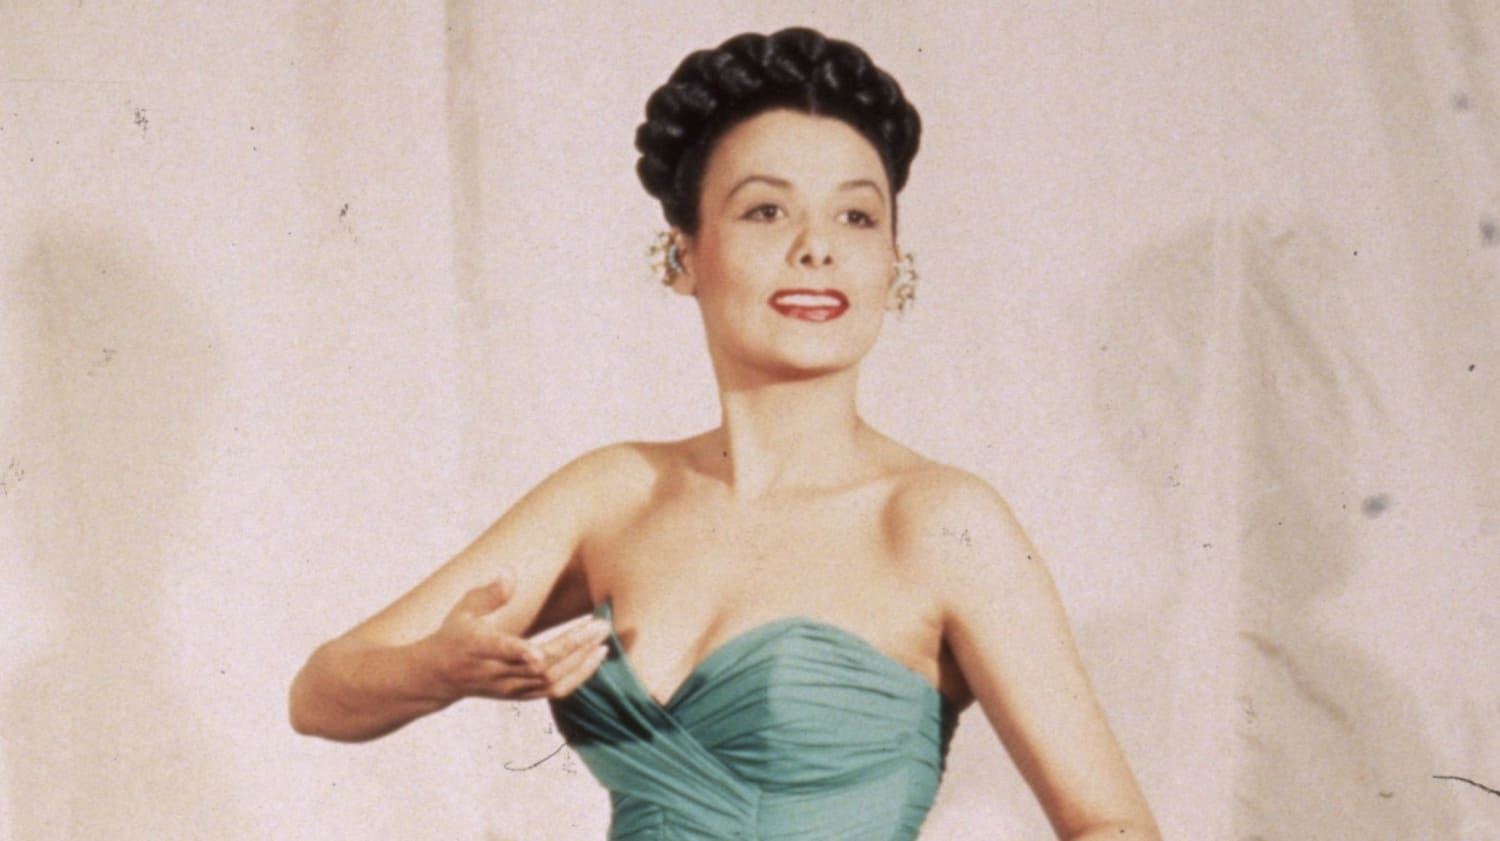 10 Amazing Facts About Lena Horne